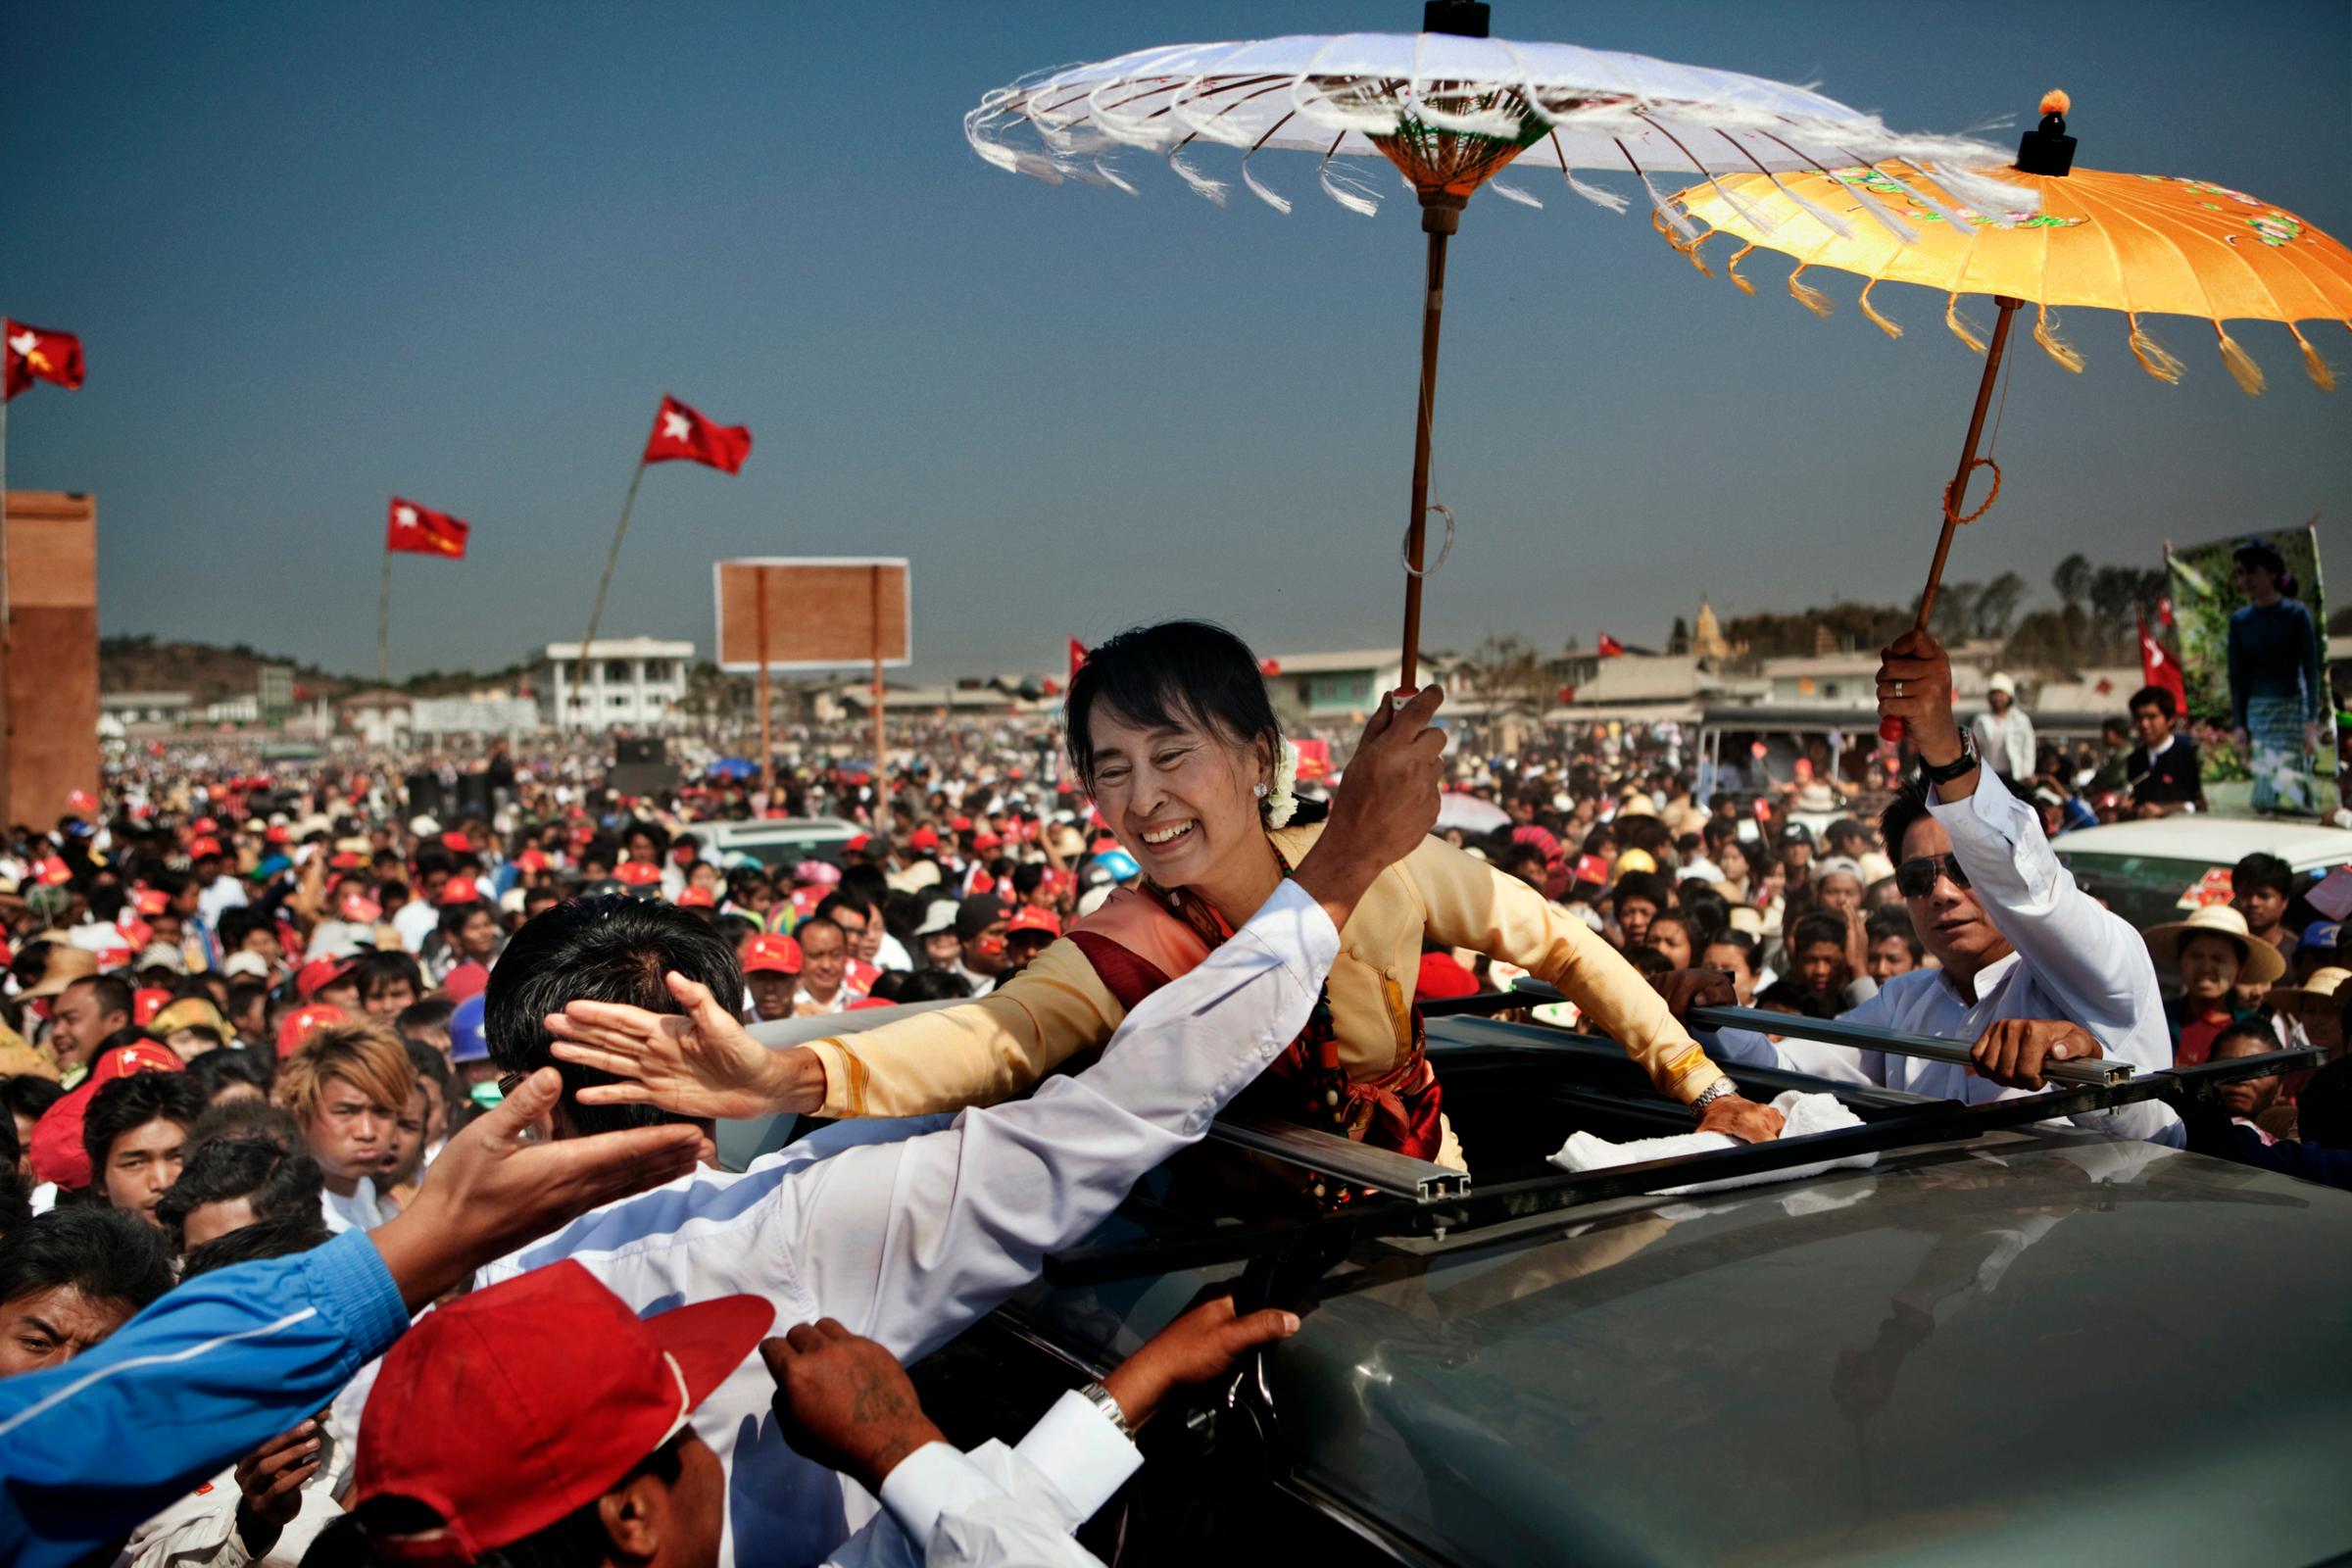 National League for Democracy (NLD) party leader Aung San Suu Kyi campaigns in Aungban, Shan State, Burma, Mar. 1, 2012.